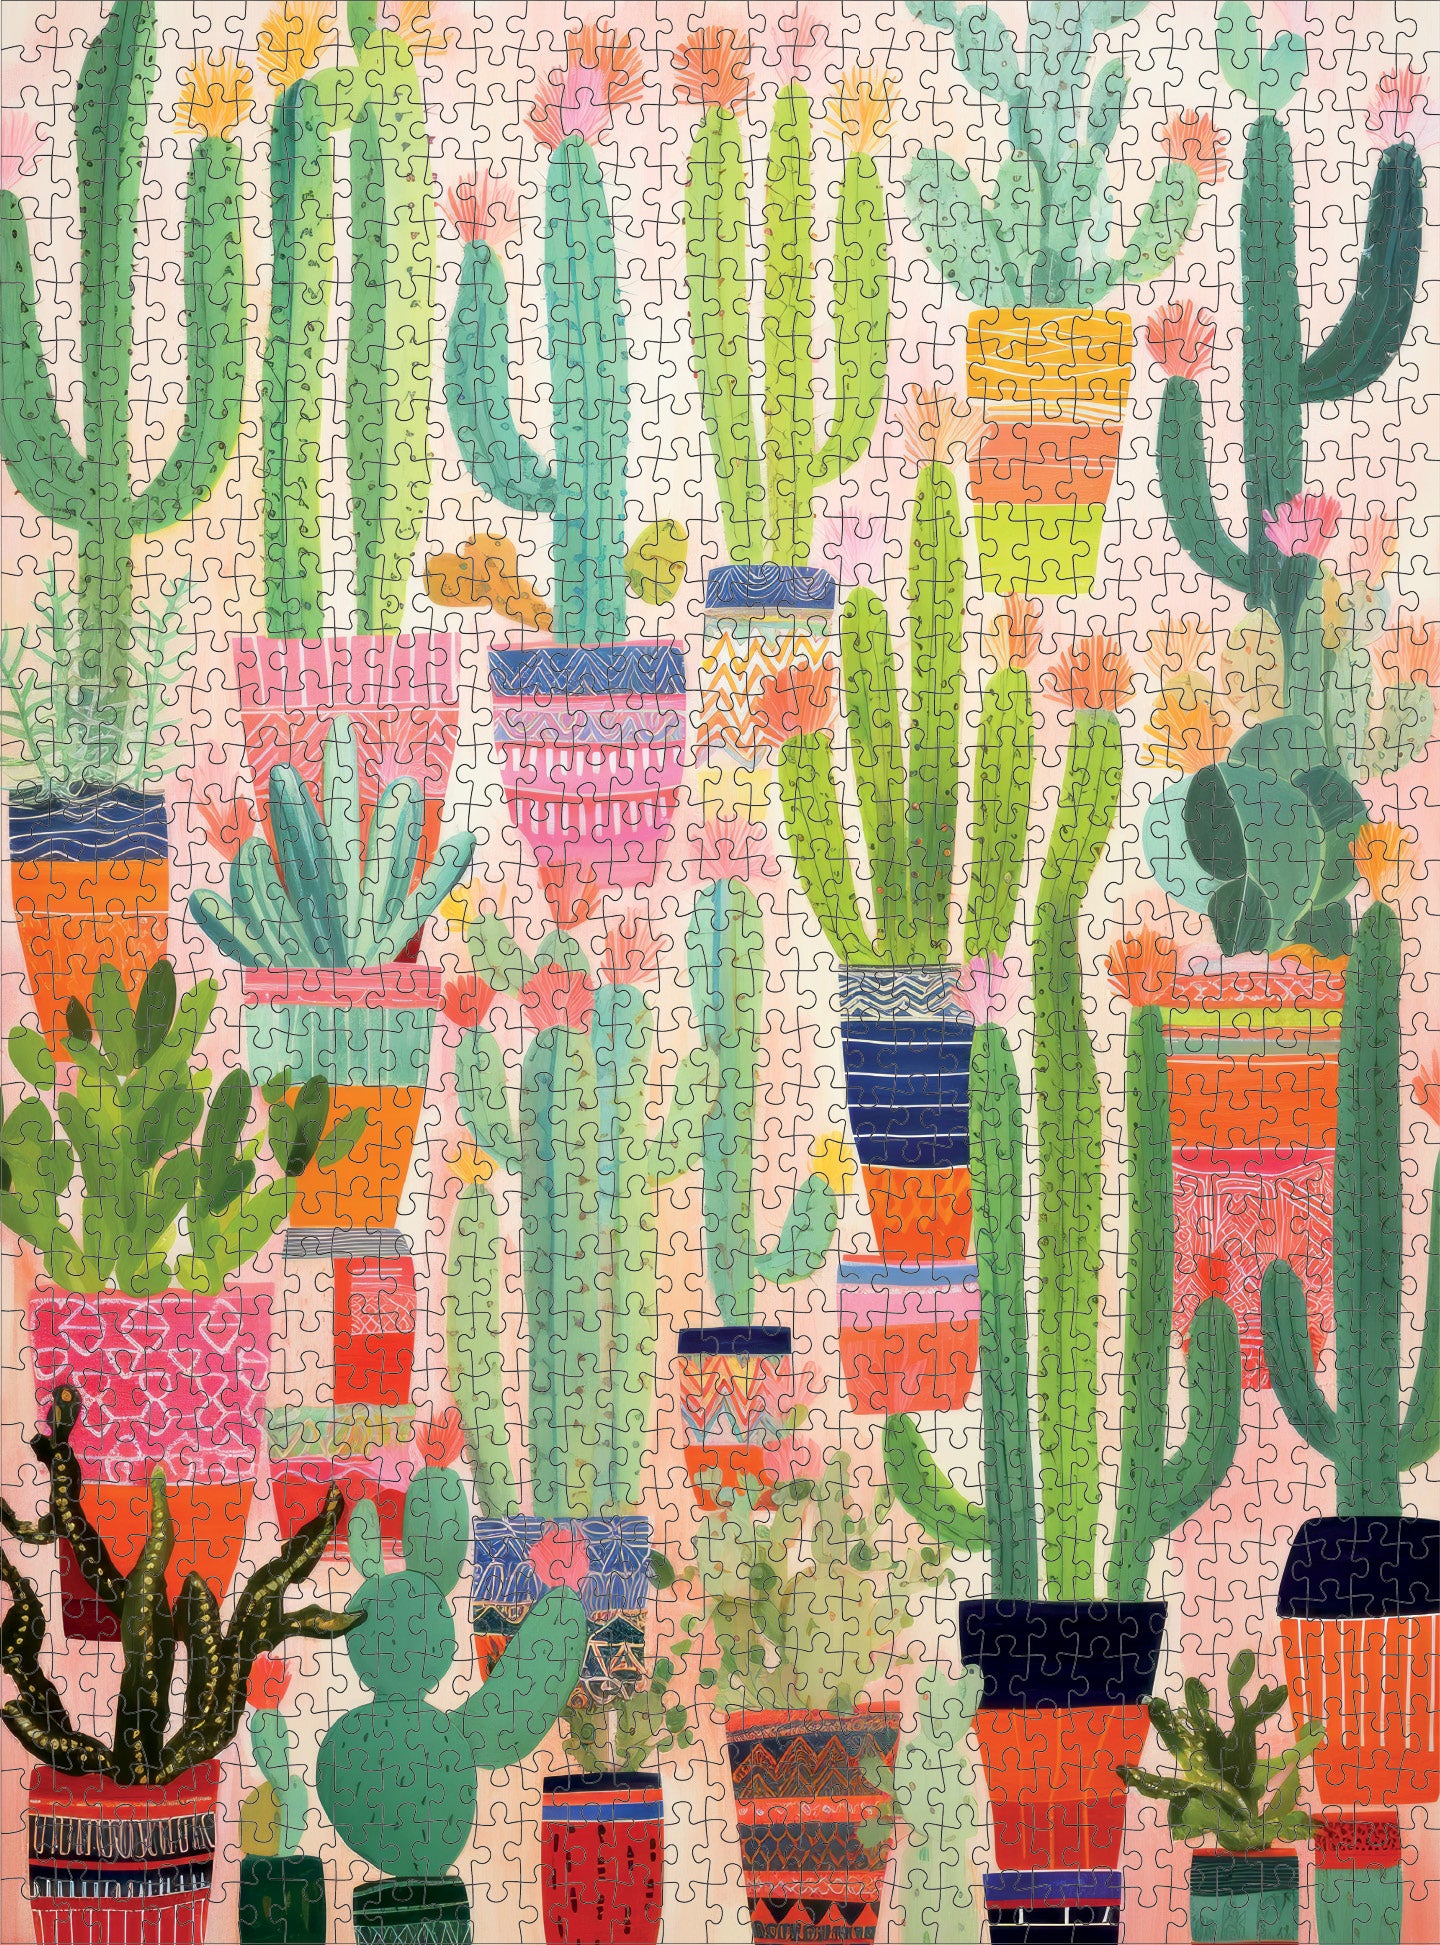 Botanical Brushstrokes - A Cacti Tapestry - 1000 Piece Jigsaw Puzzle